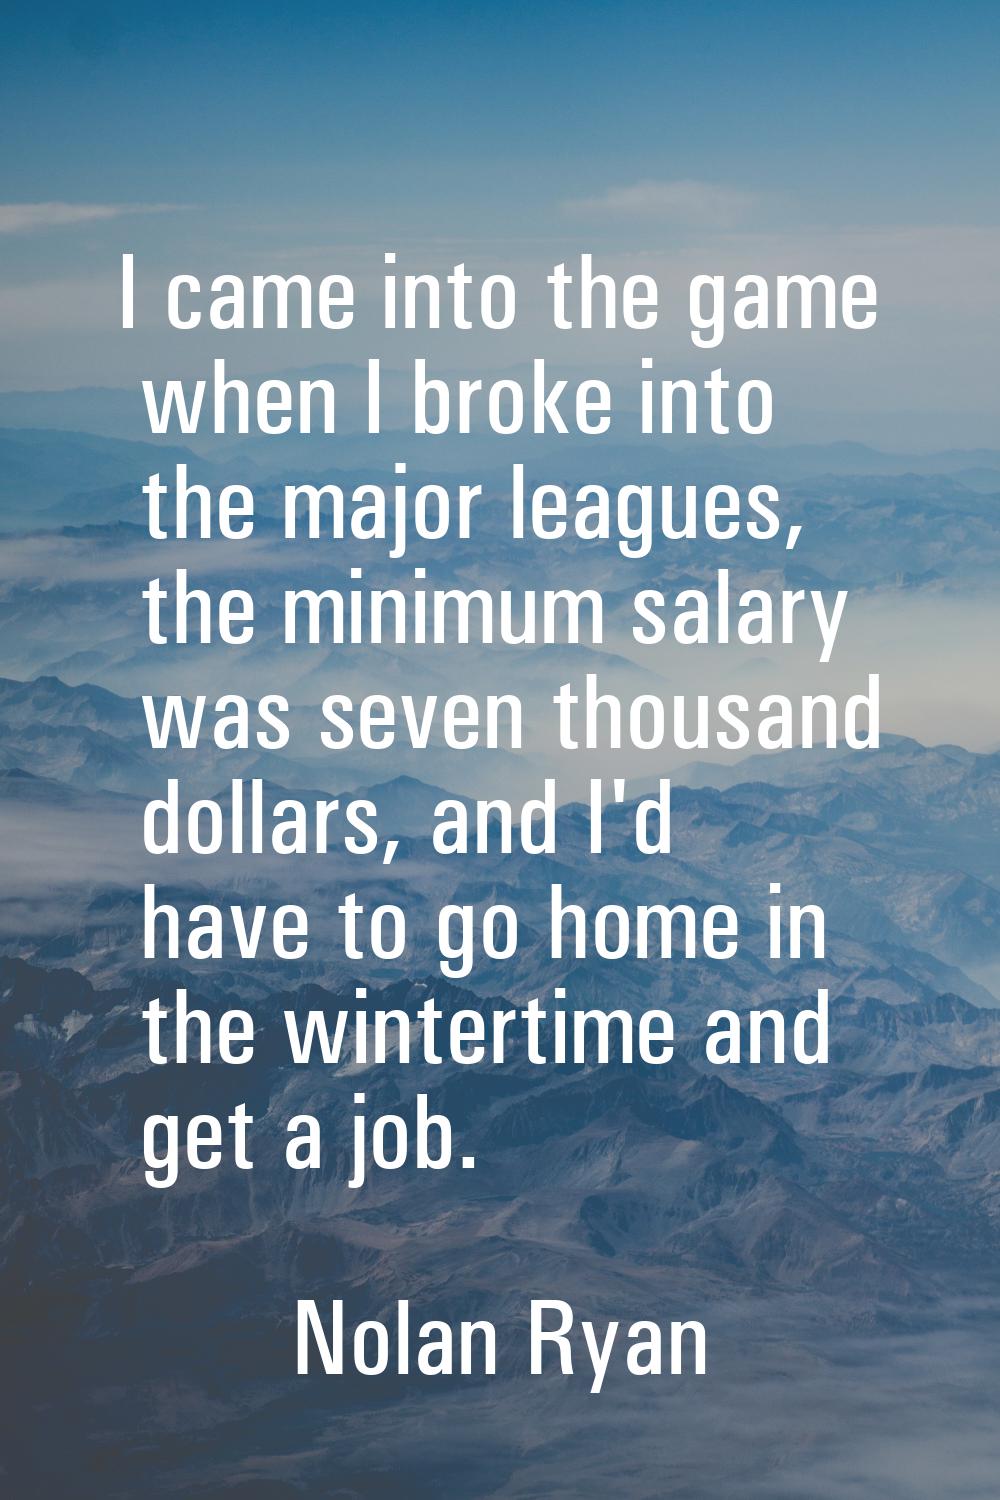 I came into the game when I broke into the major leagues, the minimum salary was seven thousand dol